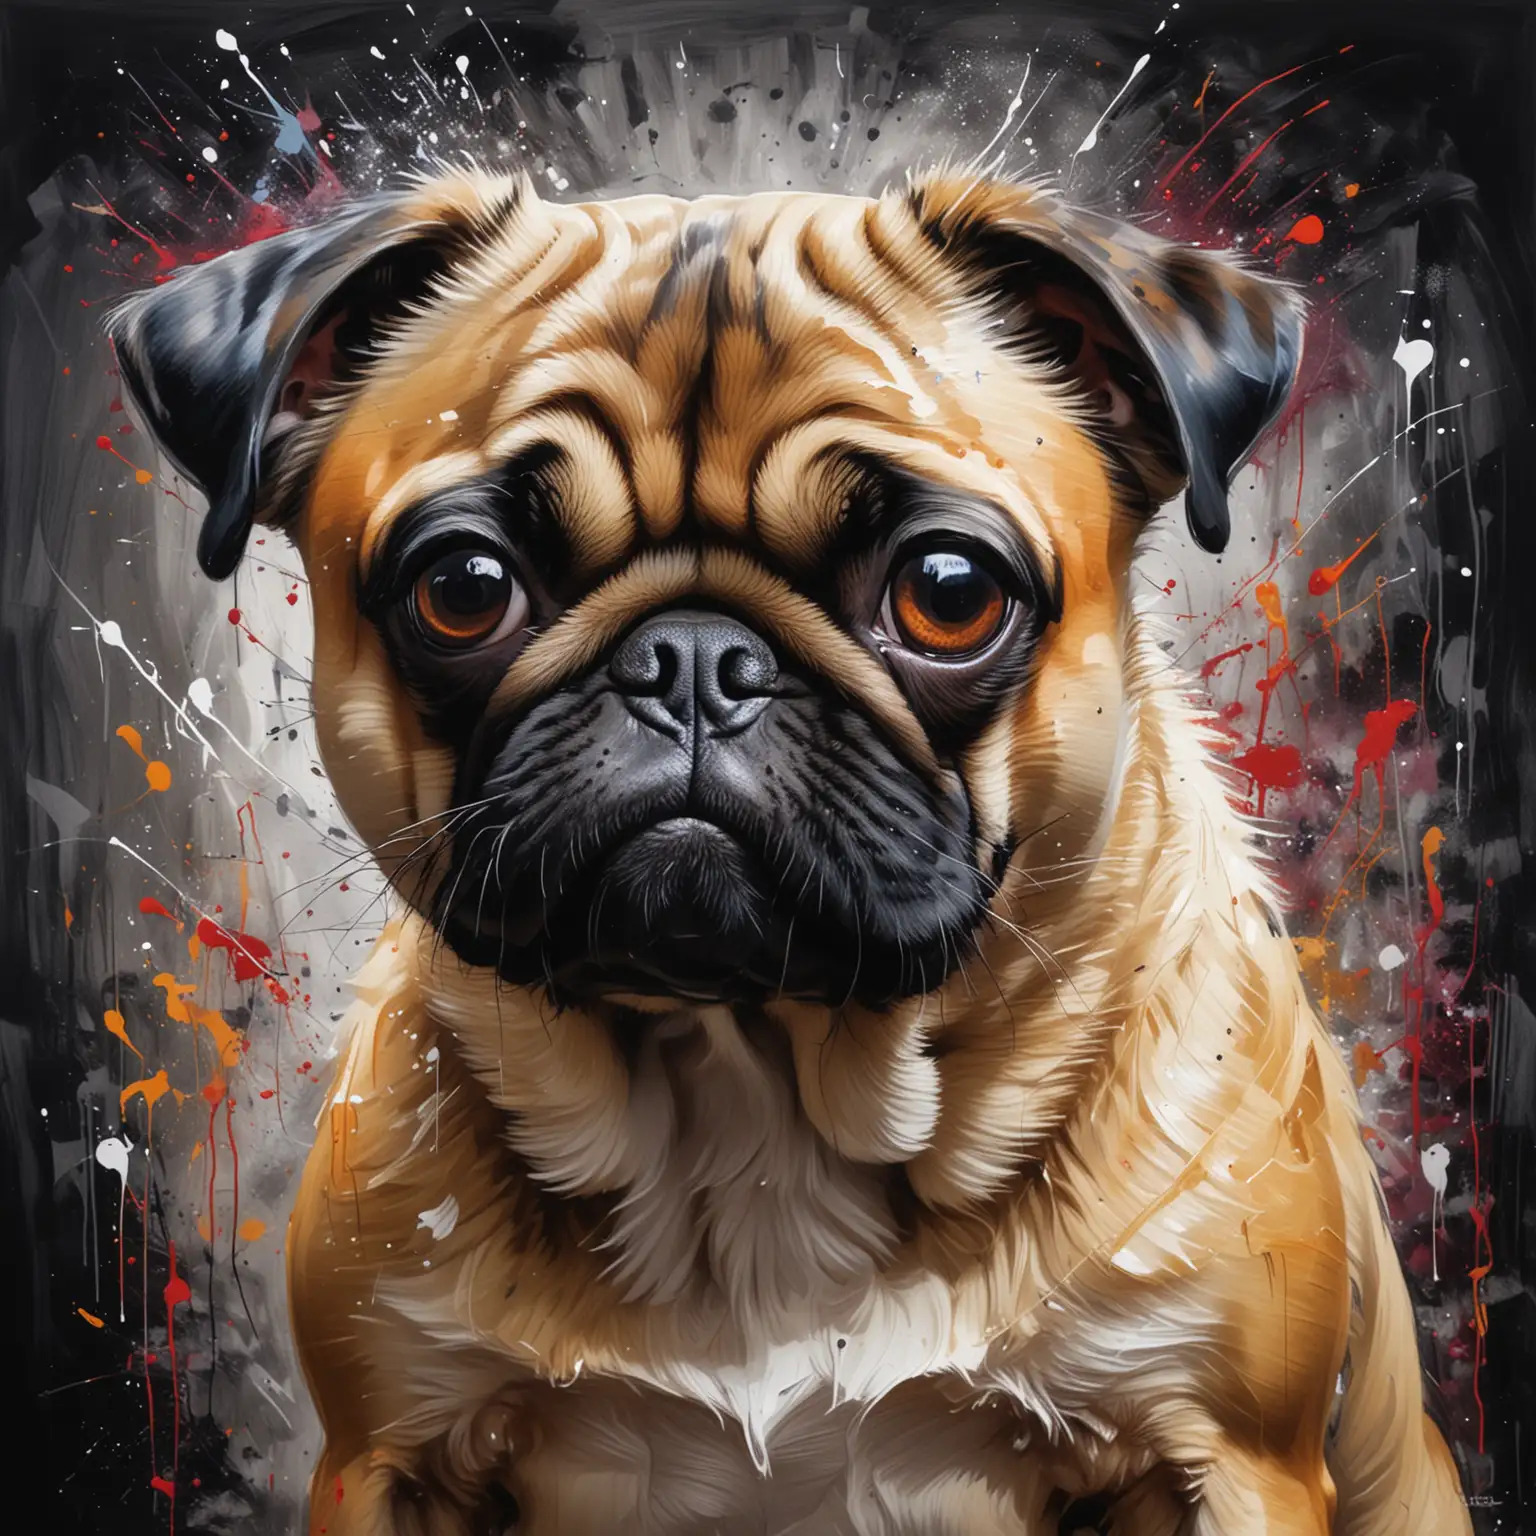 NeoExpressionist Fawn Pug Portrait with Bold Forms and Dramatic Alcohol Effects